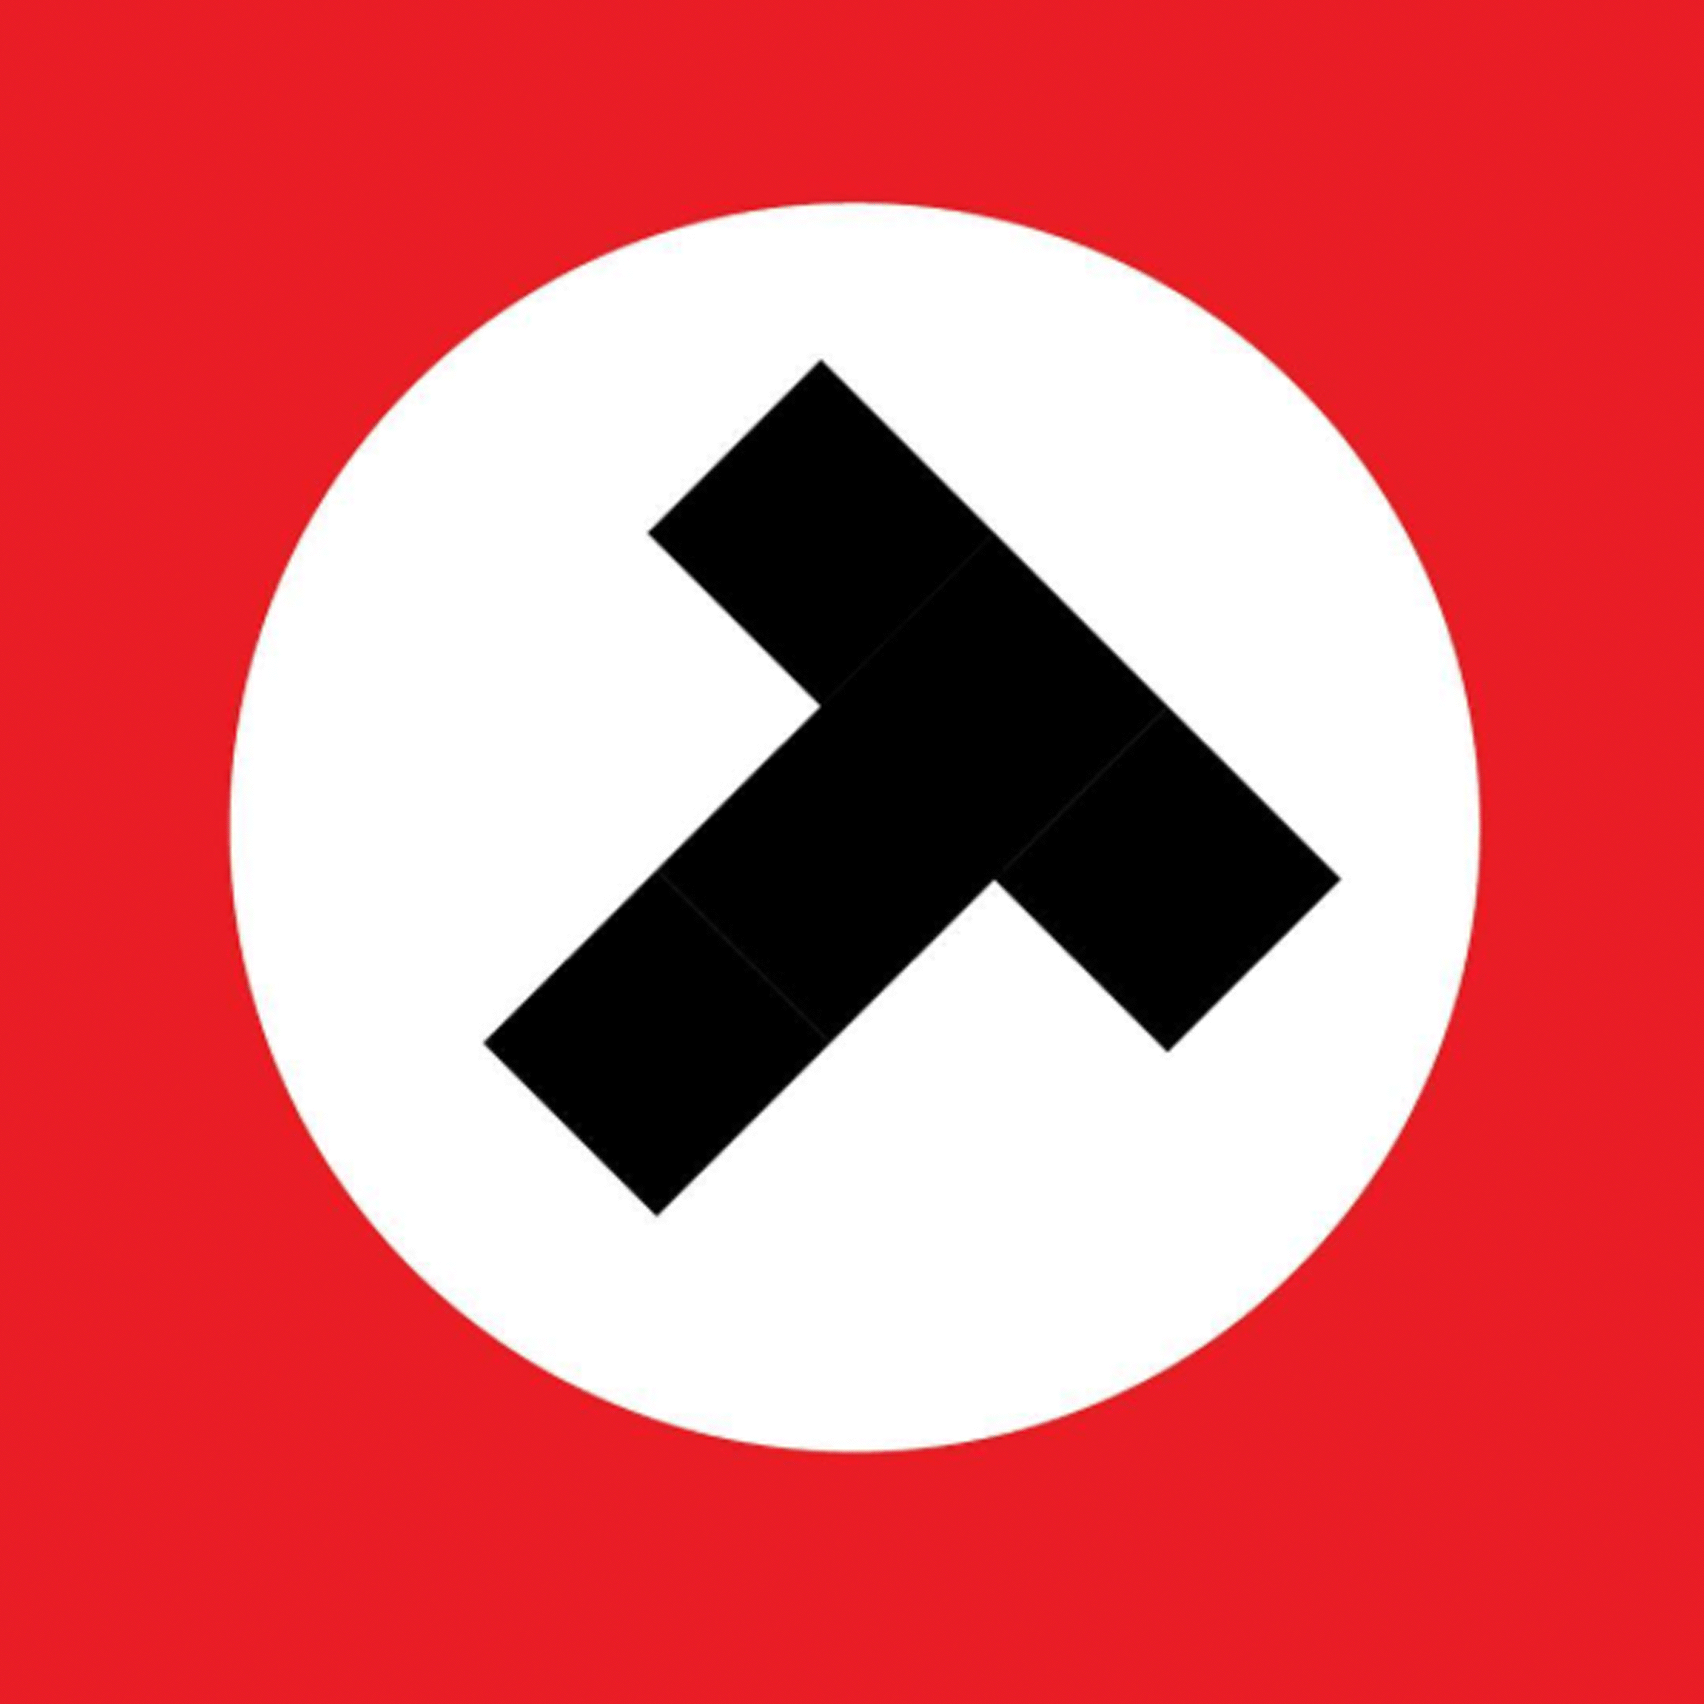 Nazi-style logo for Trump by Tucker Viemeister